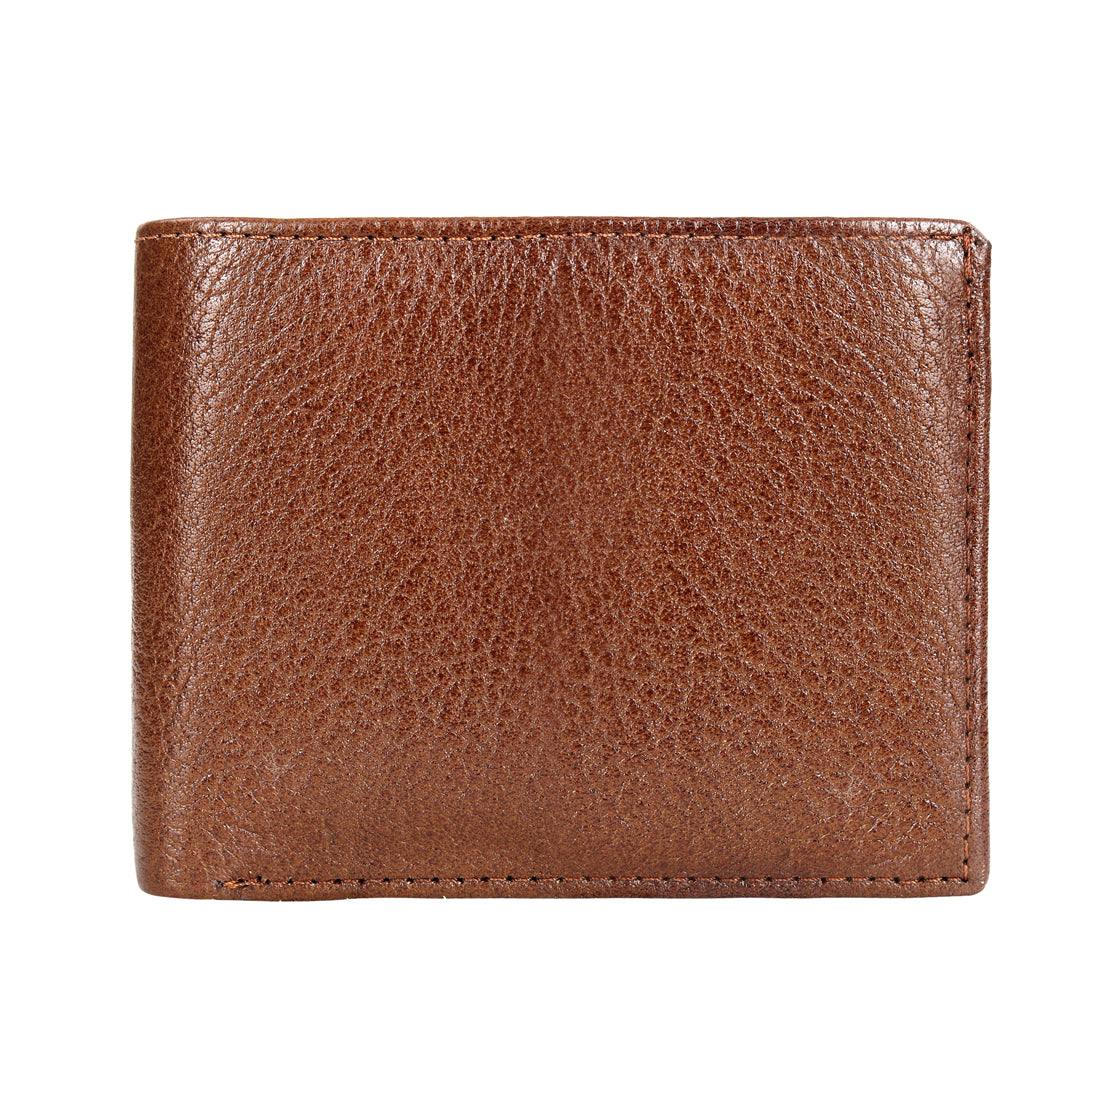 Leather World Stylish Genuine Grain Leather Wallet For Men